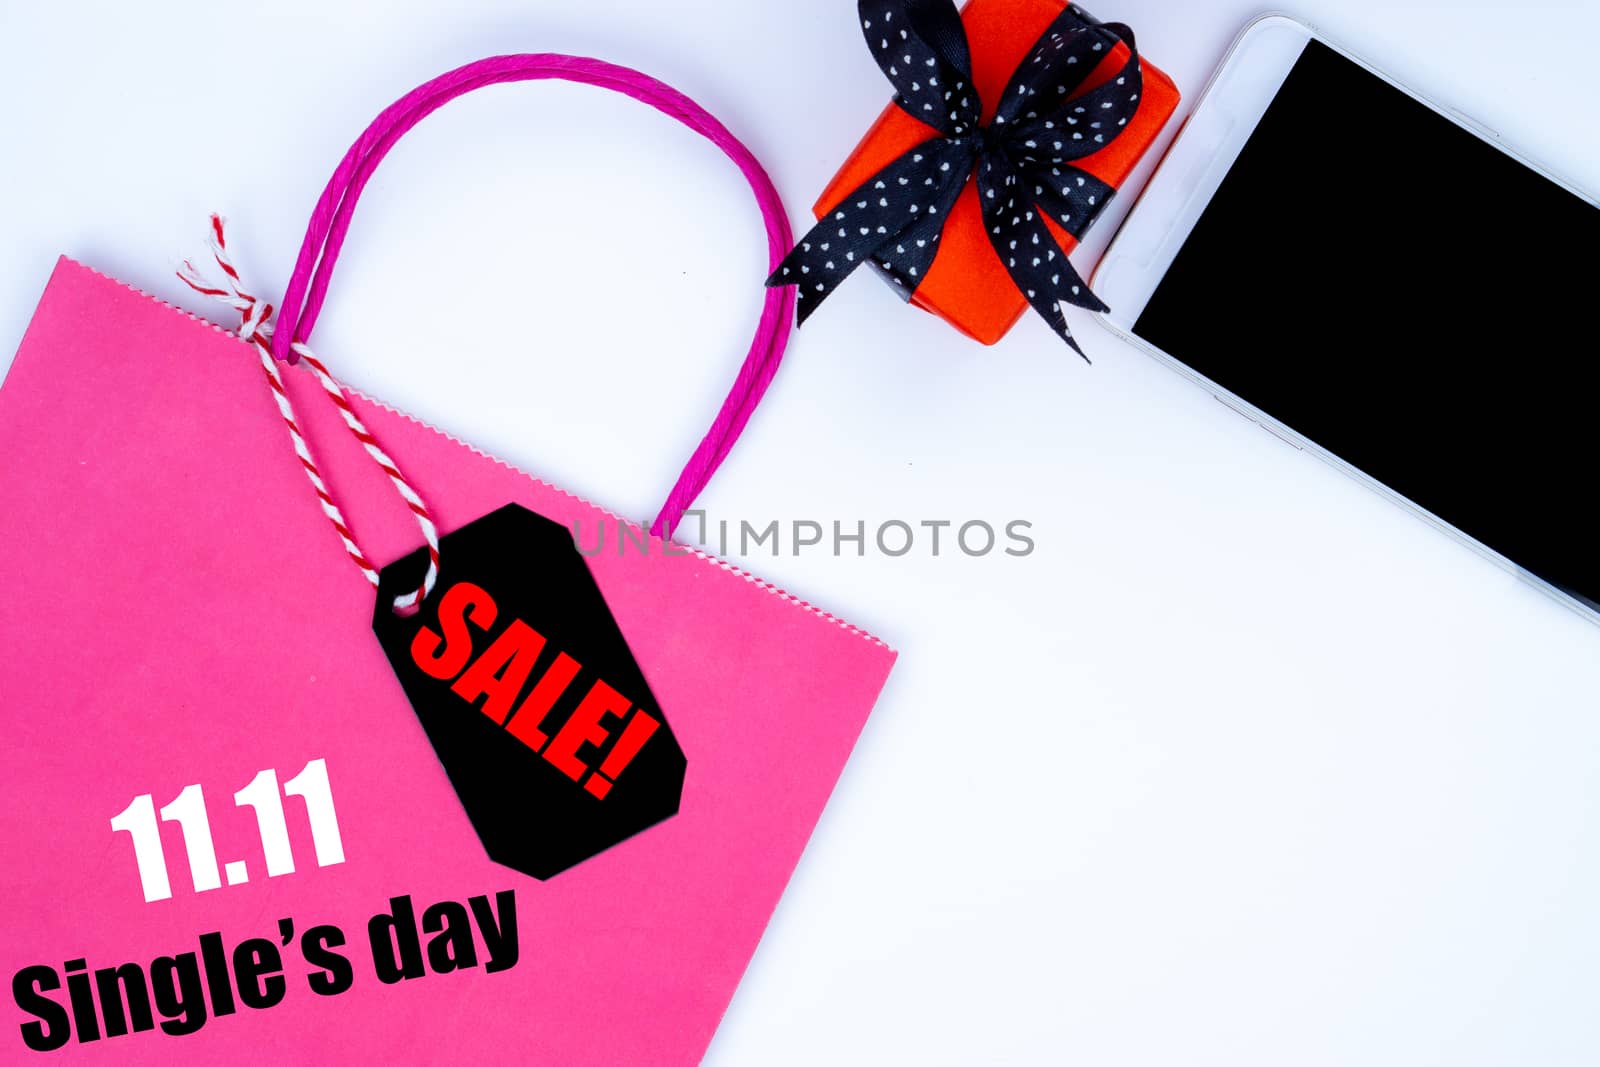 The shopping bag and Christmas boxes with black ribbon and smartphone on a white background with copy space for text.Online shopping of China, 11.11 single's day sale concept